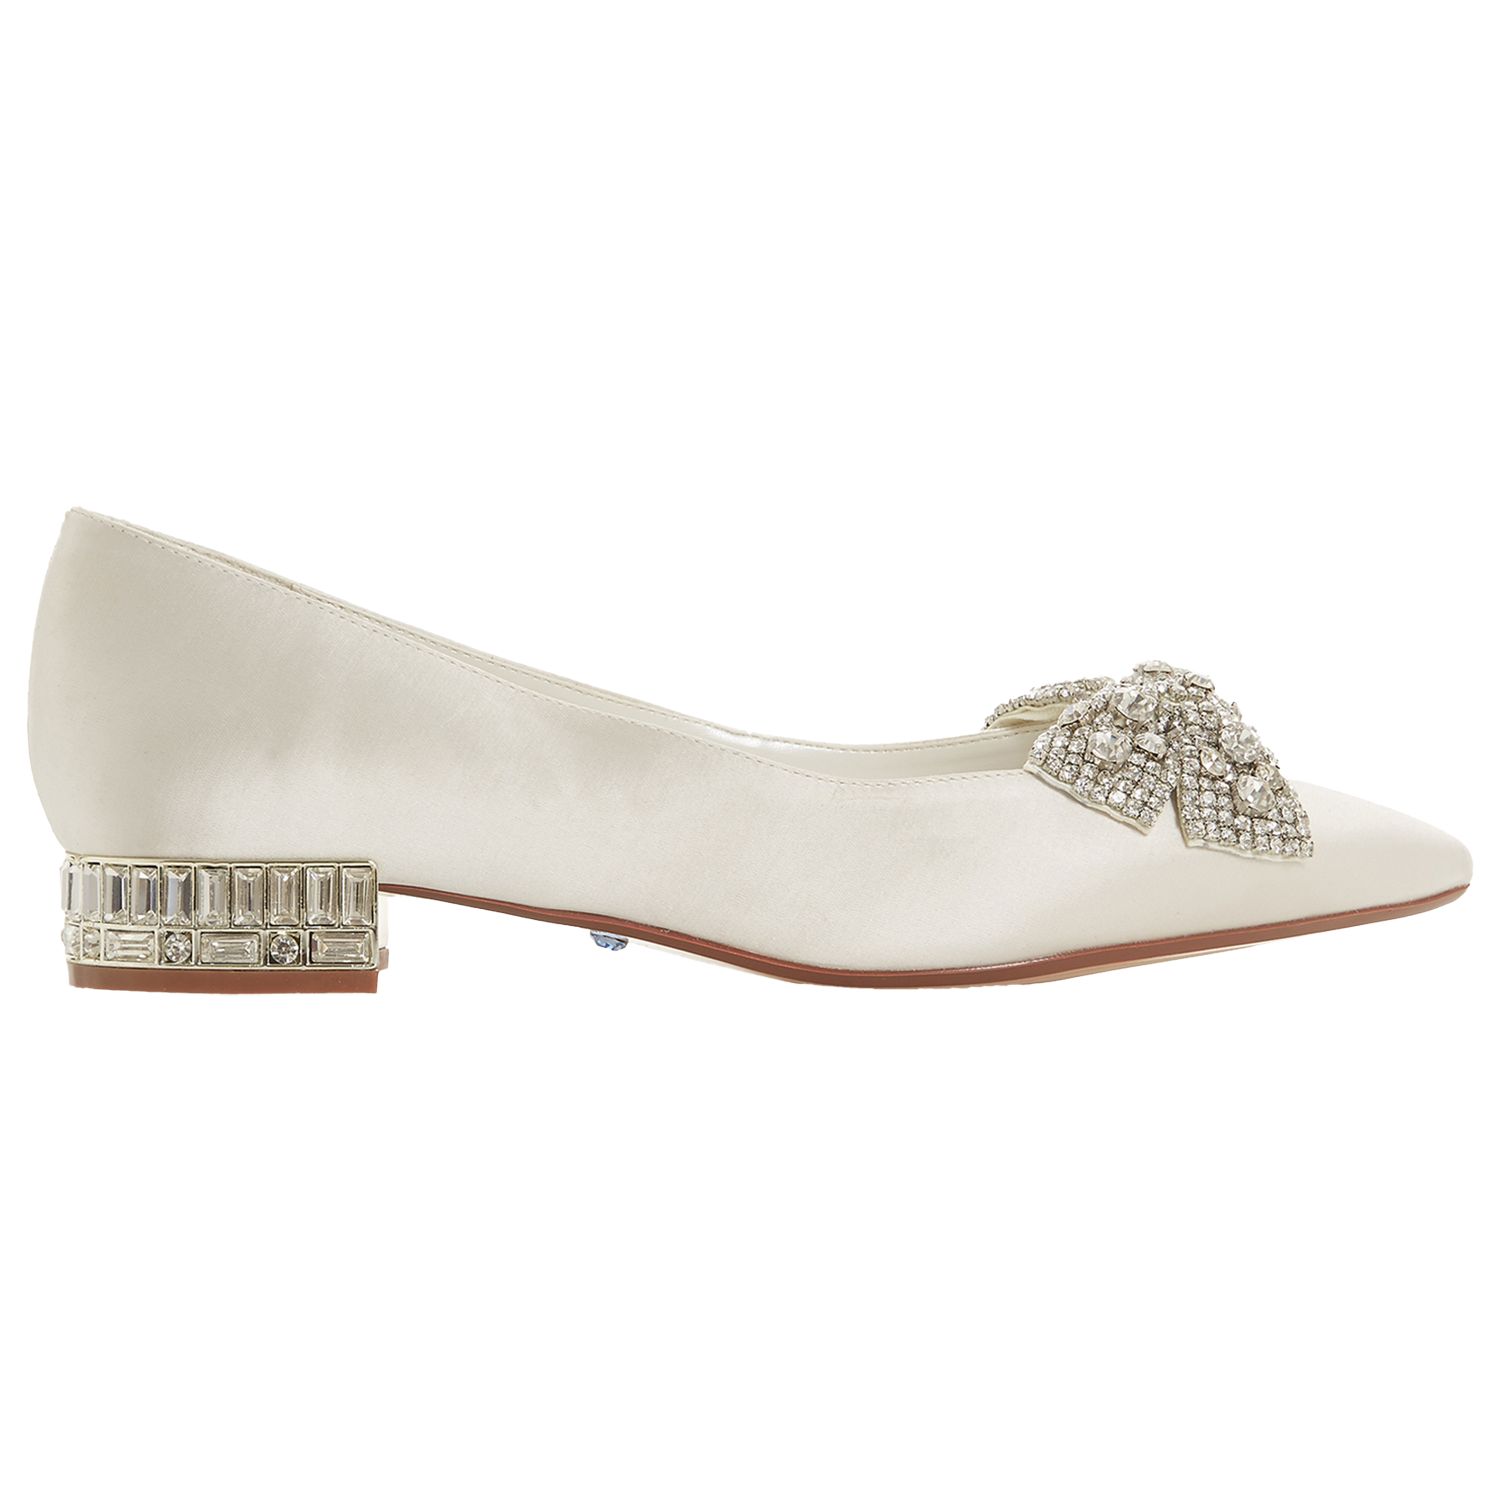 Dune Bridal Collection Bow Tie Ballet Pumps, Ivory, 3